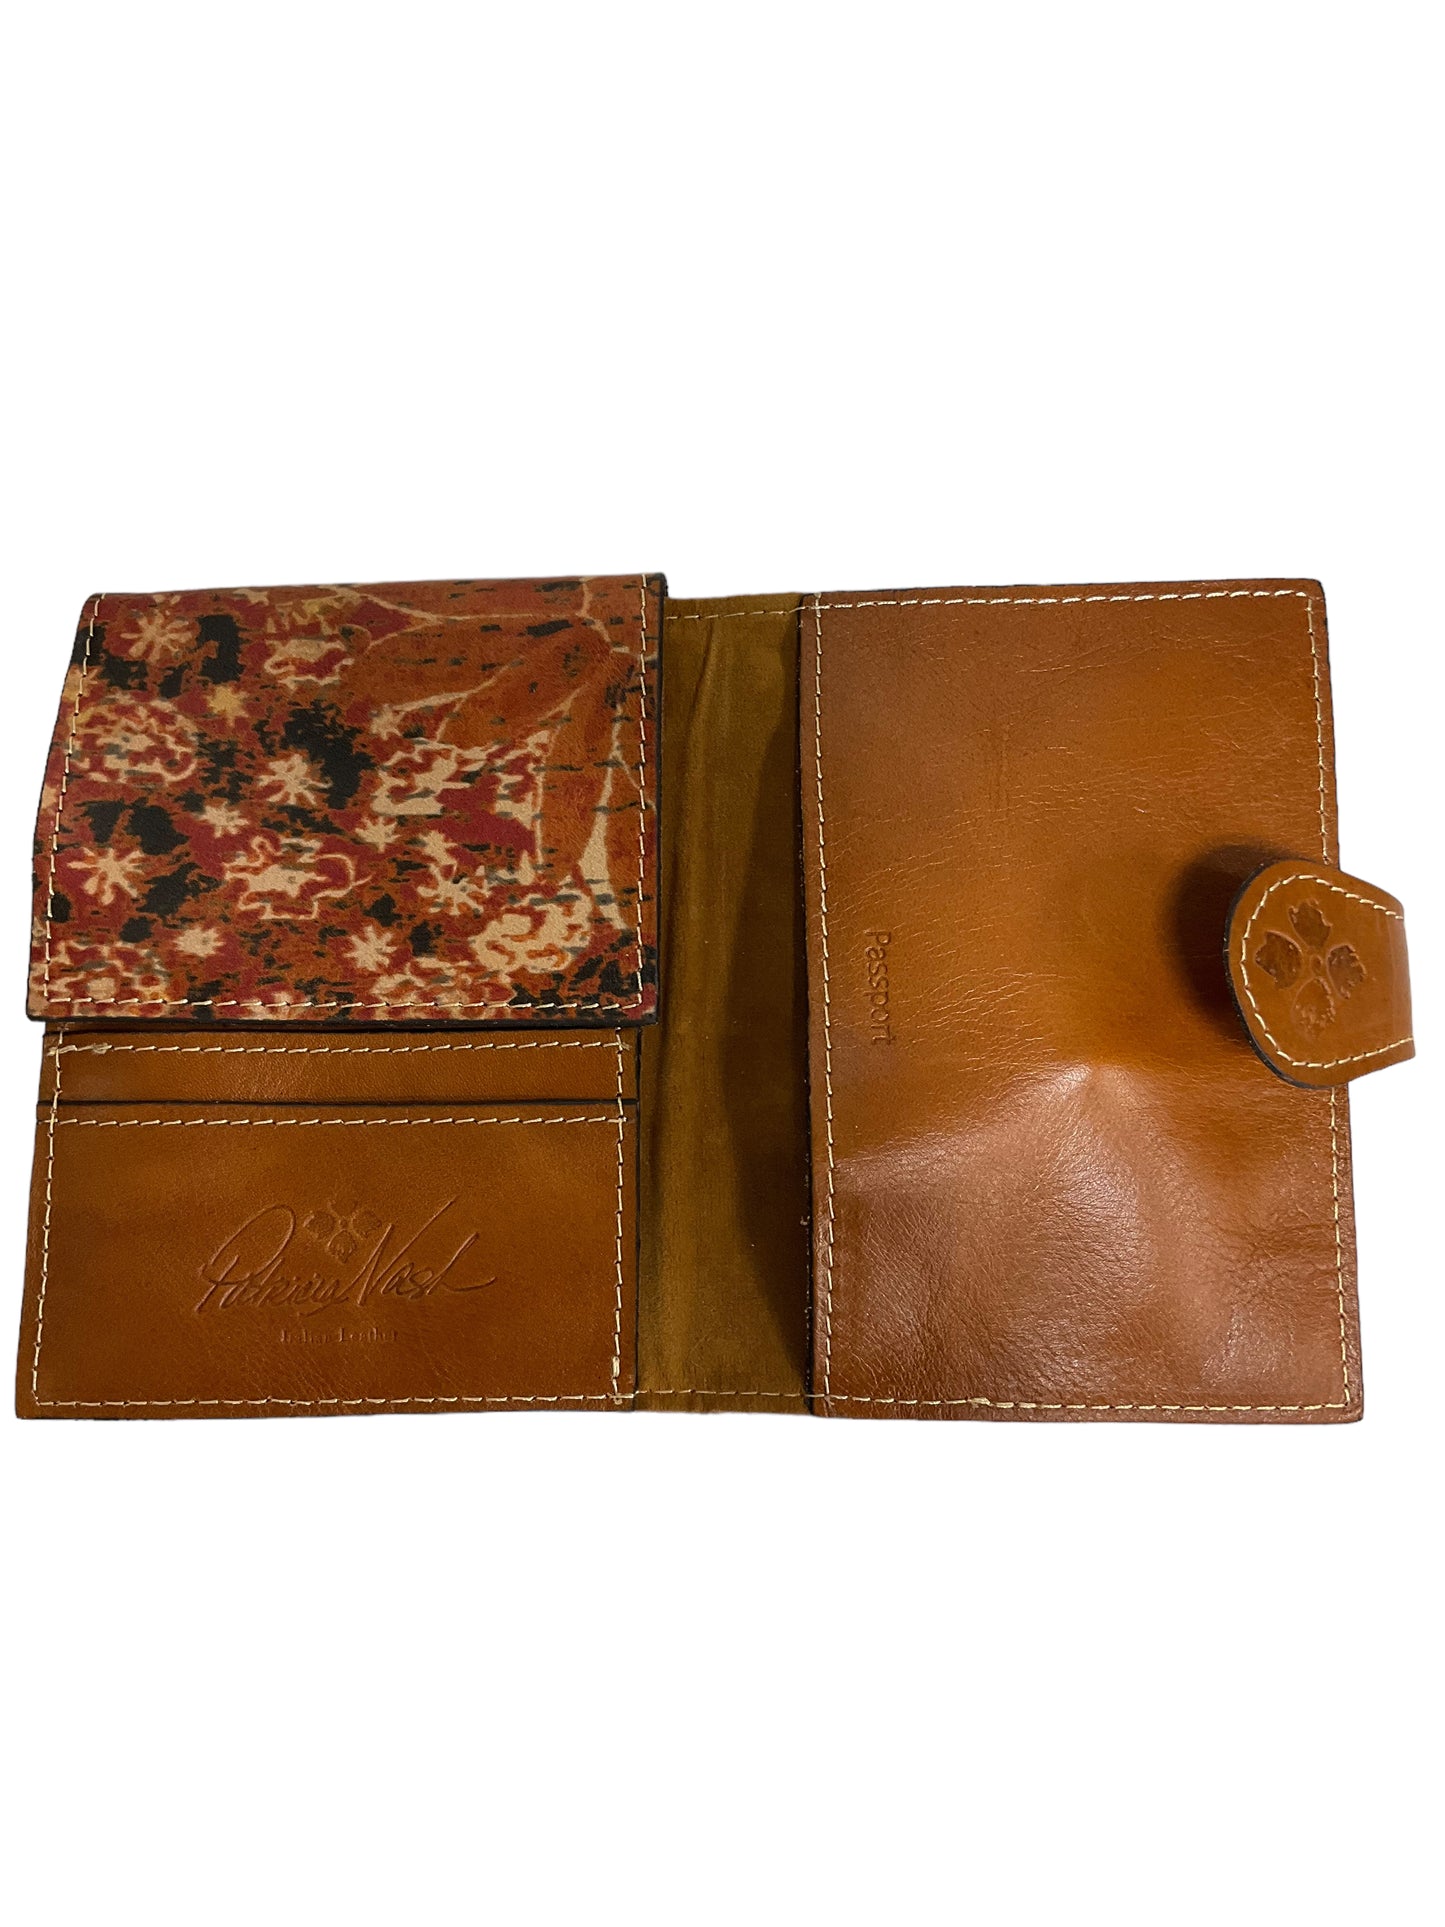 Wallet By Patricia Nash  Size: Small